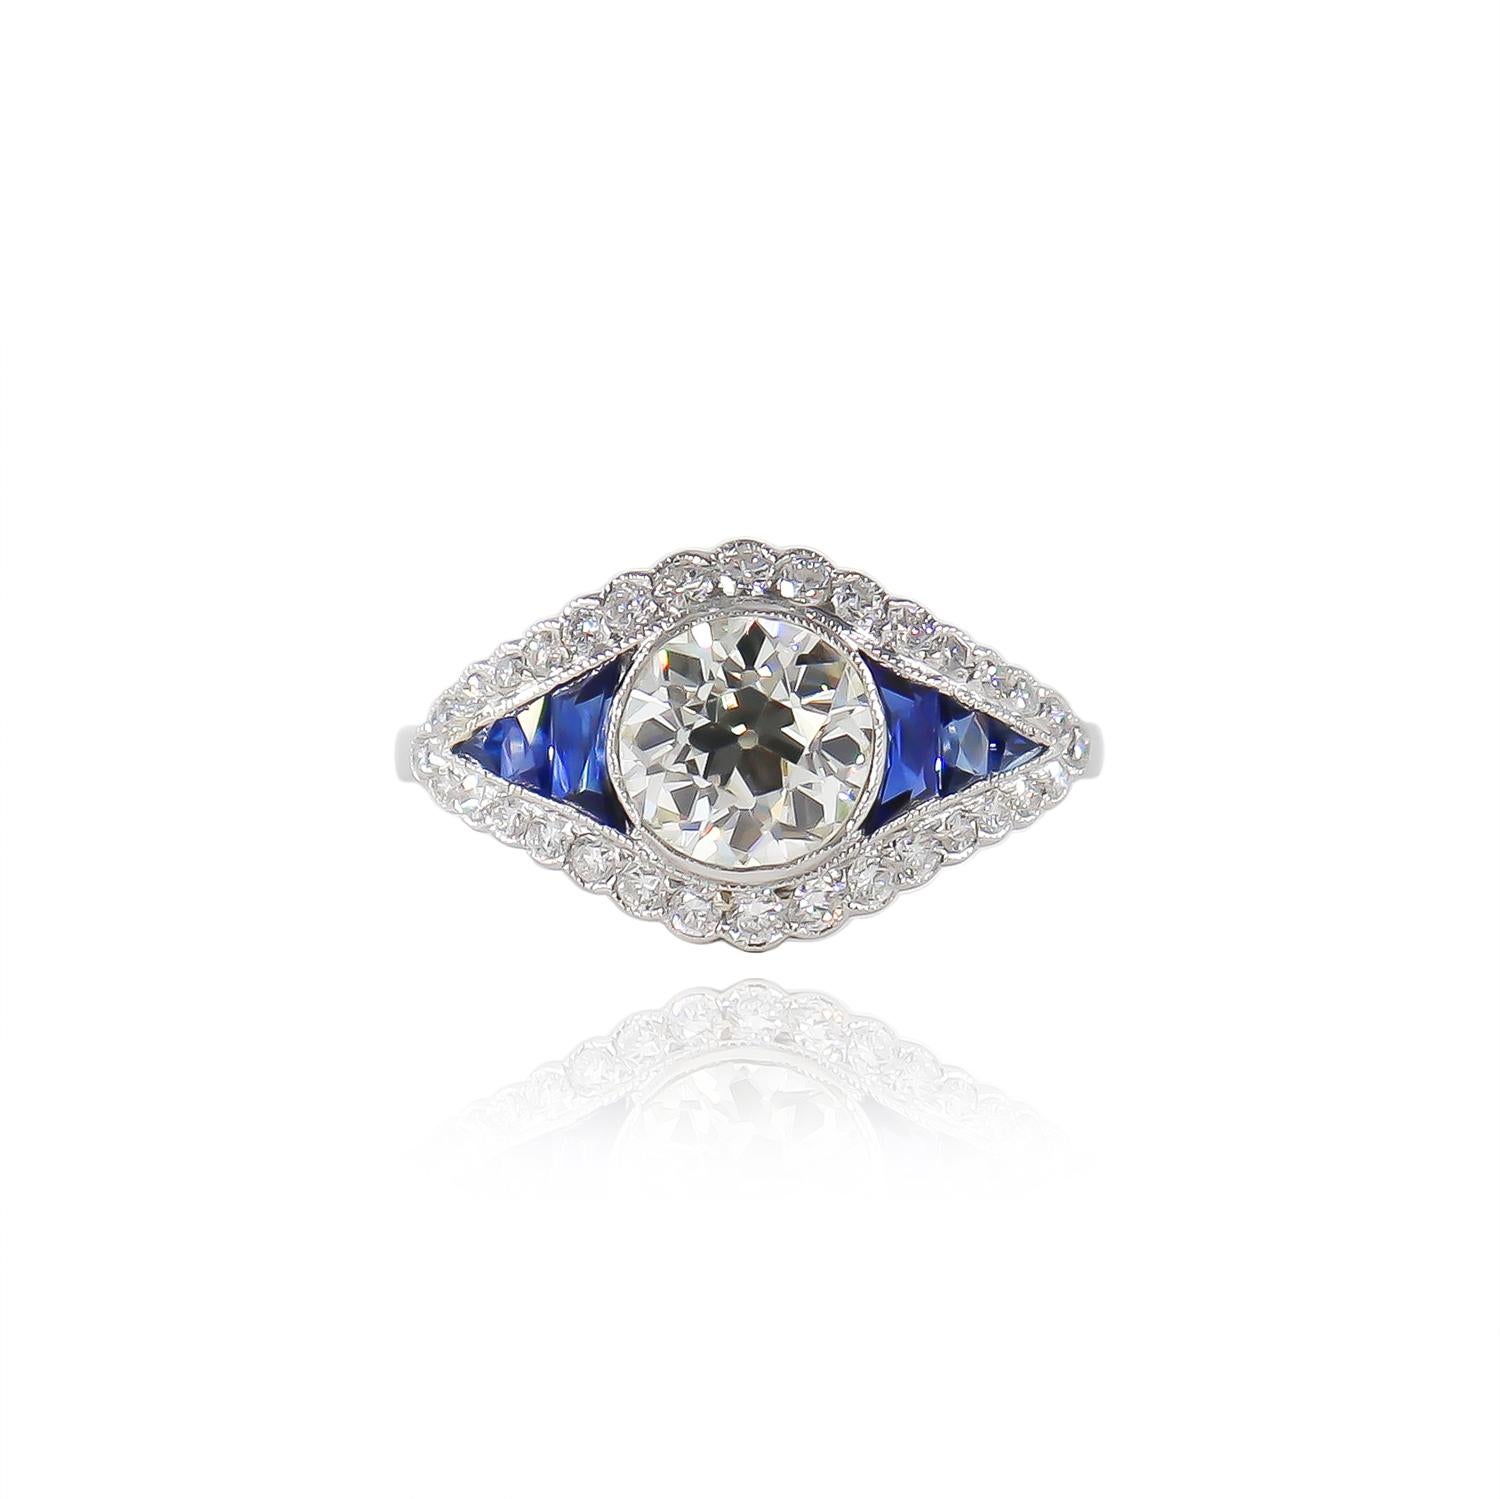 This breathtaking new acquisition by J. Birnbach features a GIA certified 1.21 carat Old European cut diamond of L color and SI1 clarity as described by GIA grading report #6214214288. The center stone is flanked by six, french-cut sapphires and a